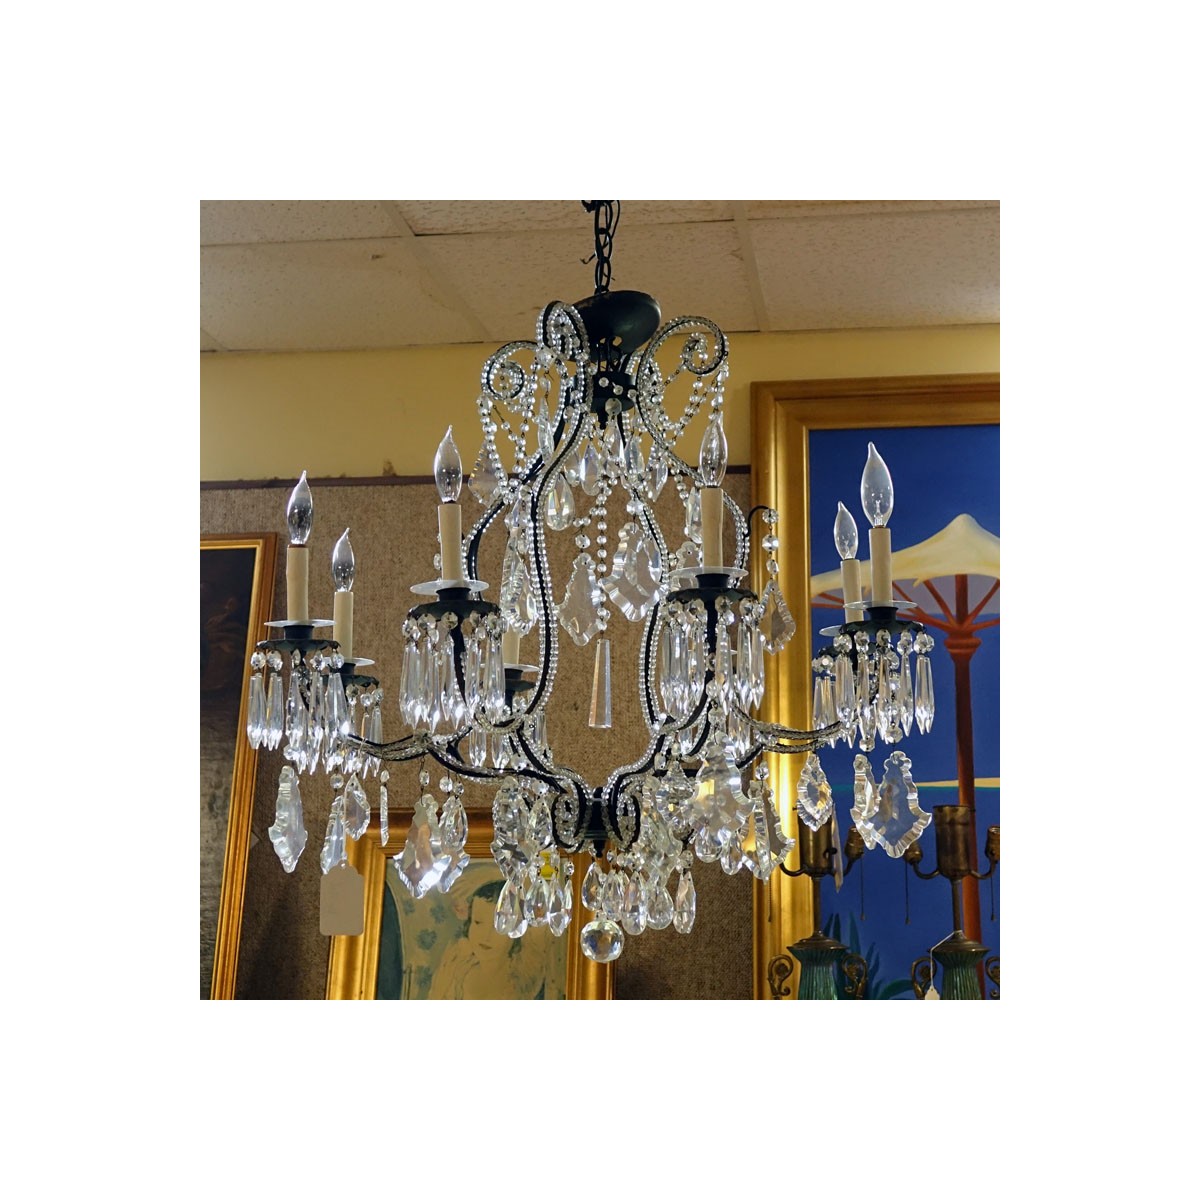 Antique Style Beaded Chandelier with Hanging Prisms. Rubbing to frame, a few missing crystals other